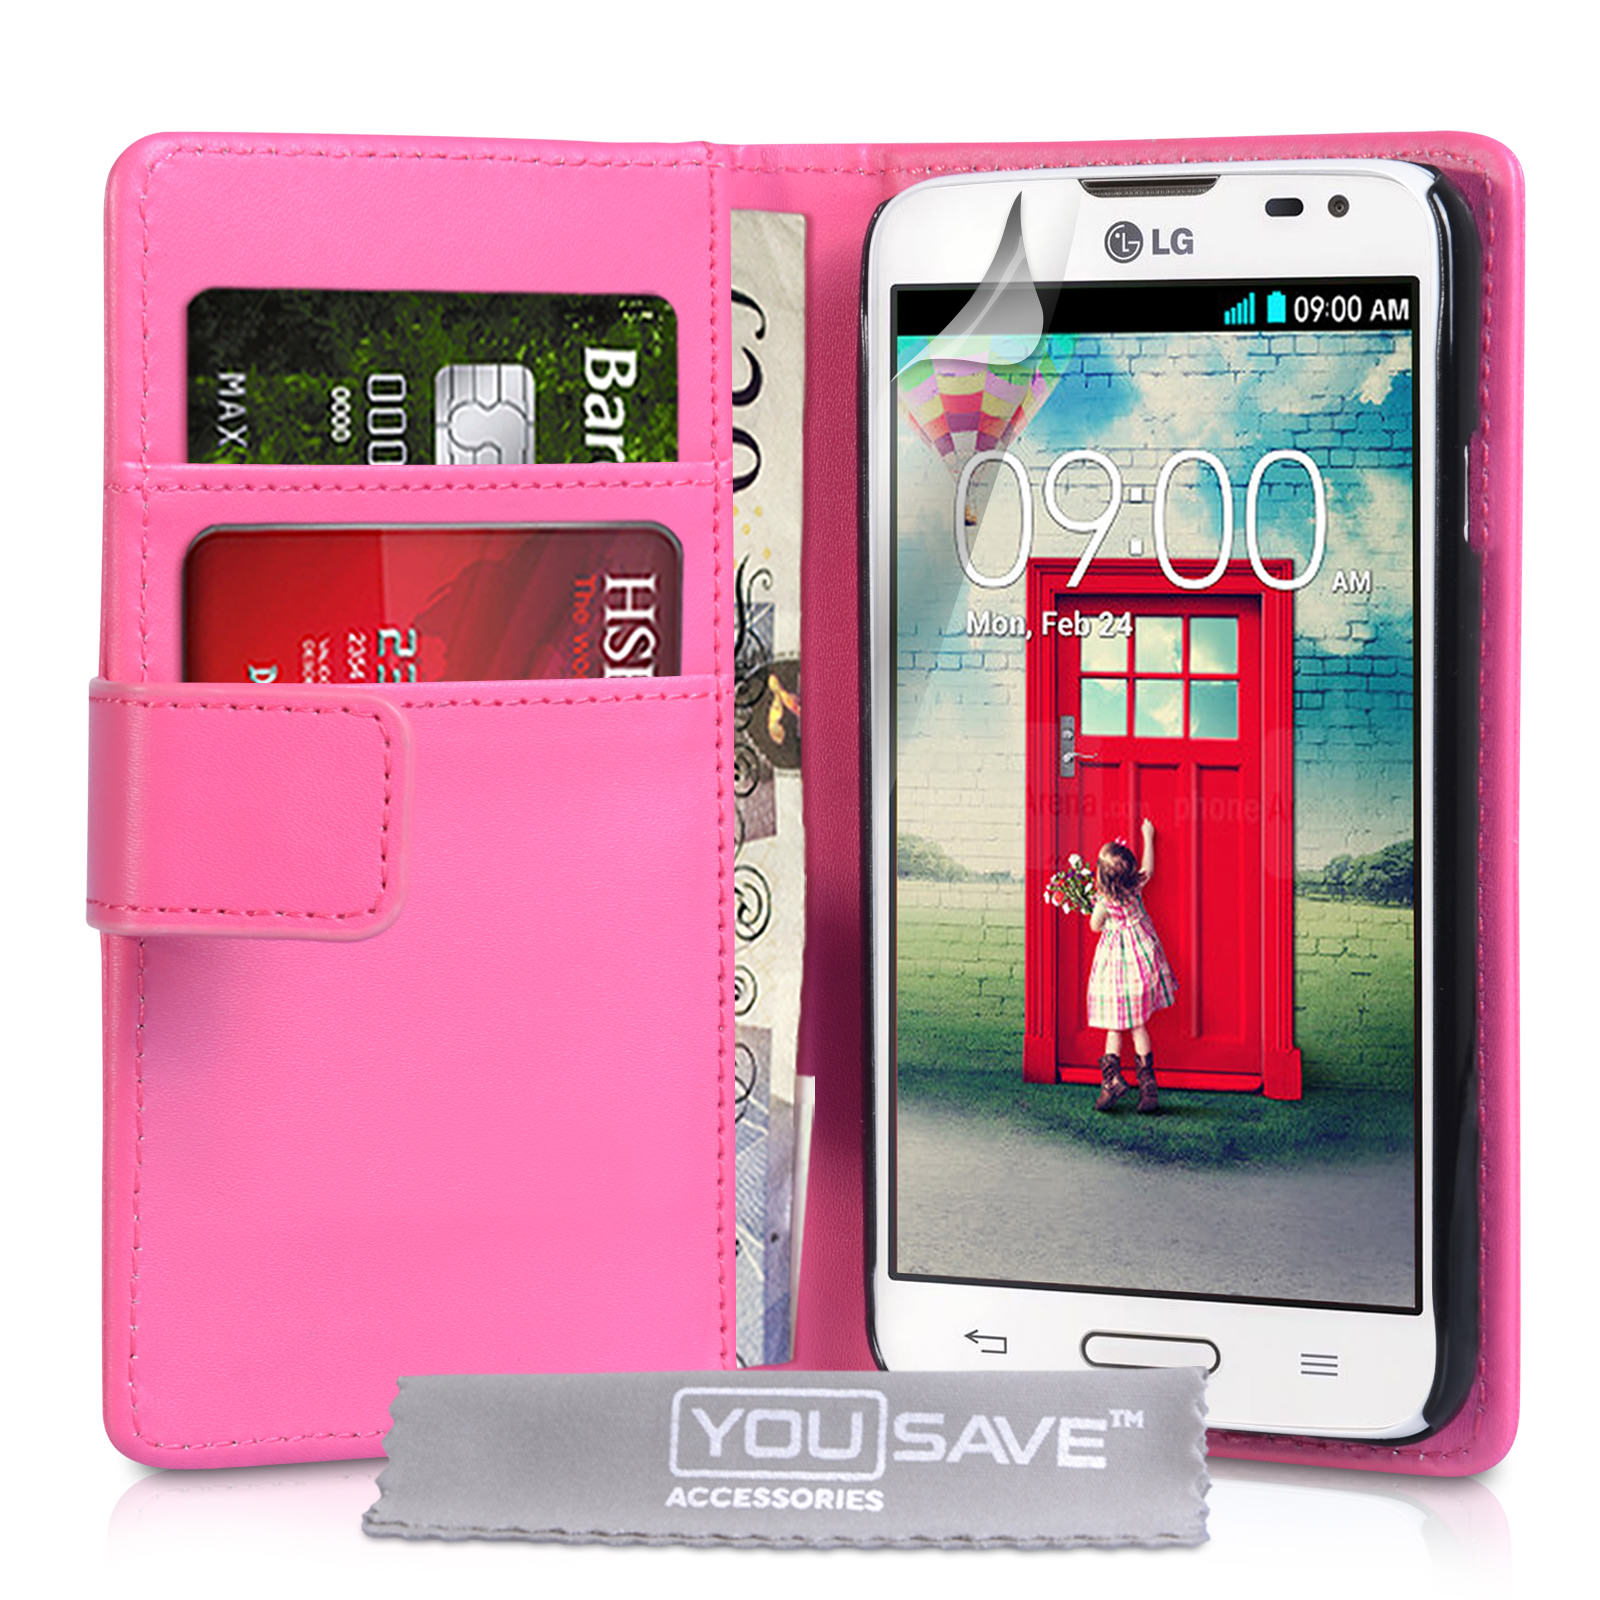 YouSave Accessories LG L90 Leather-Effect Wallet Case - Hot Pink